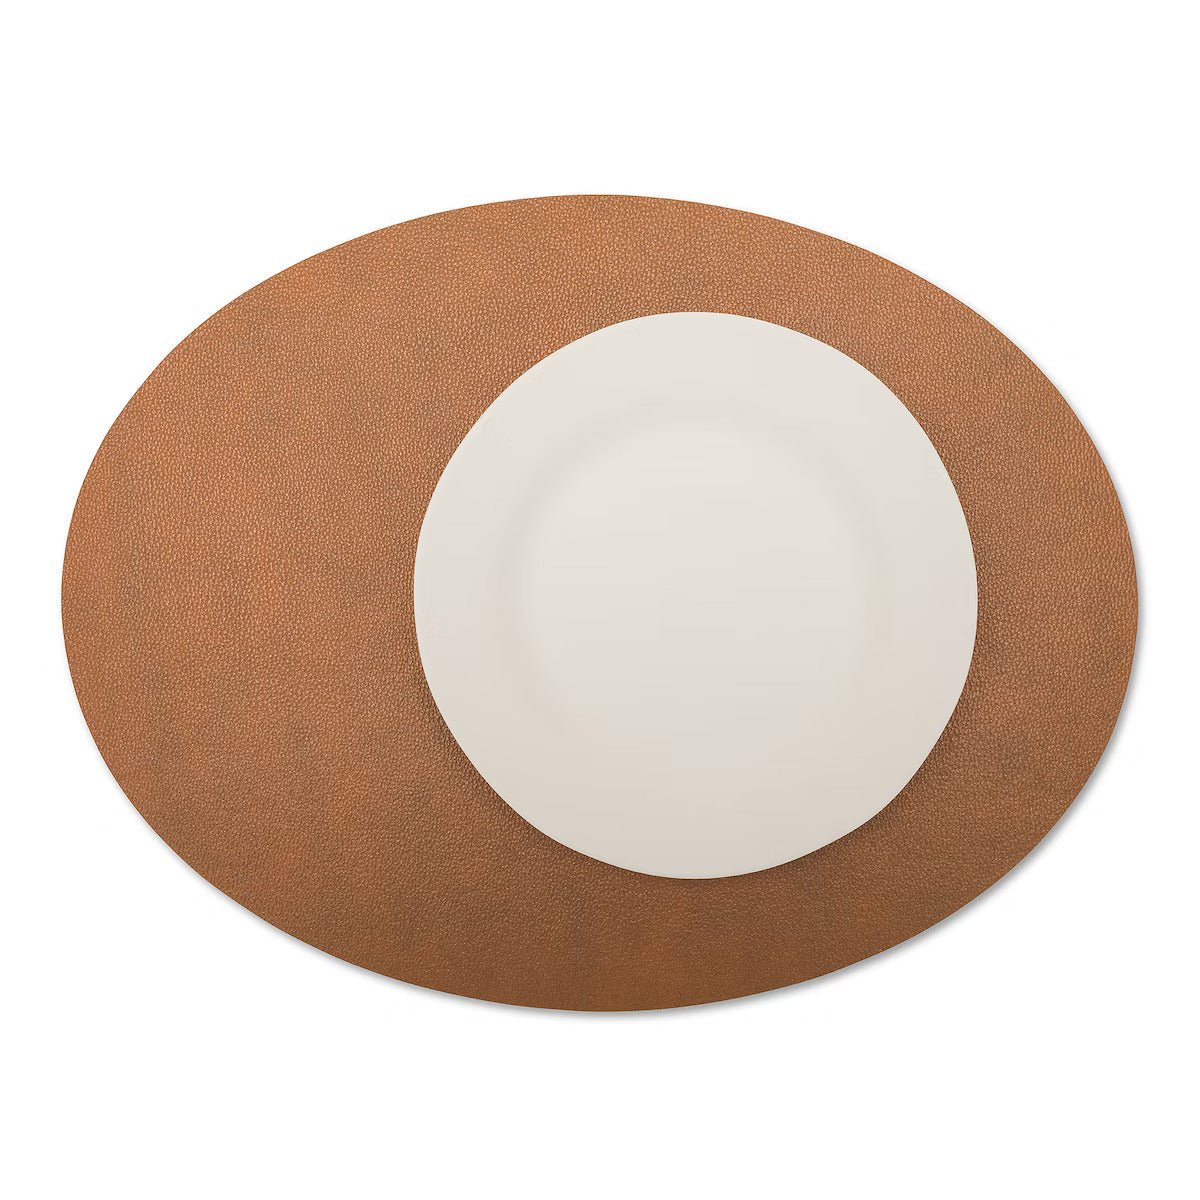 A large oval textured washable paper placemat in tan is shown under a white plate.